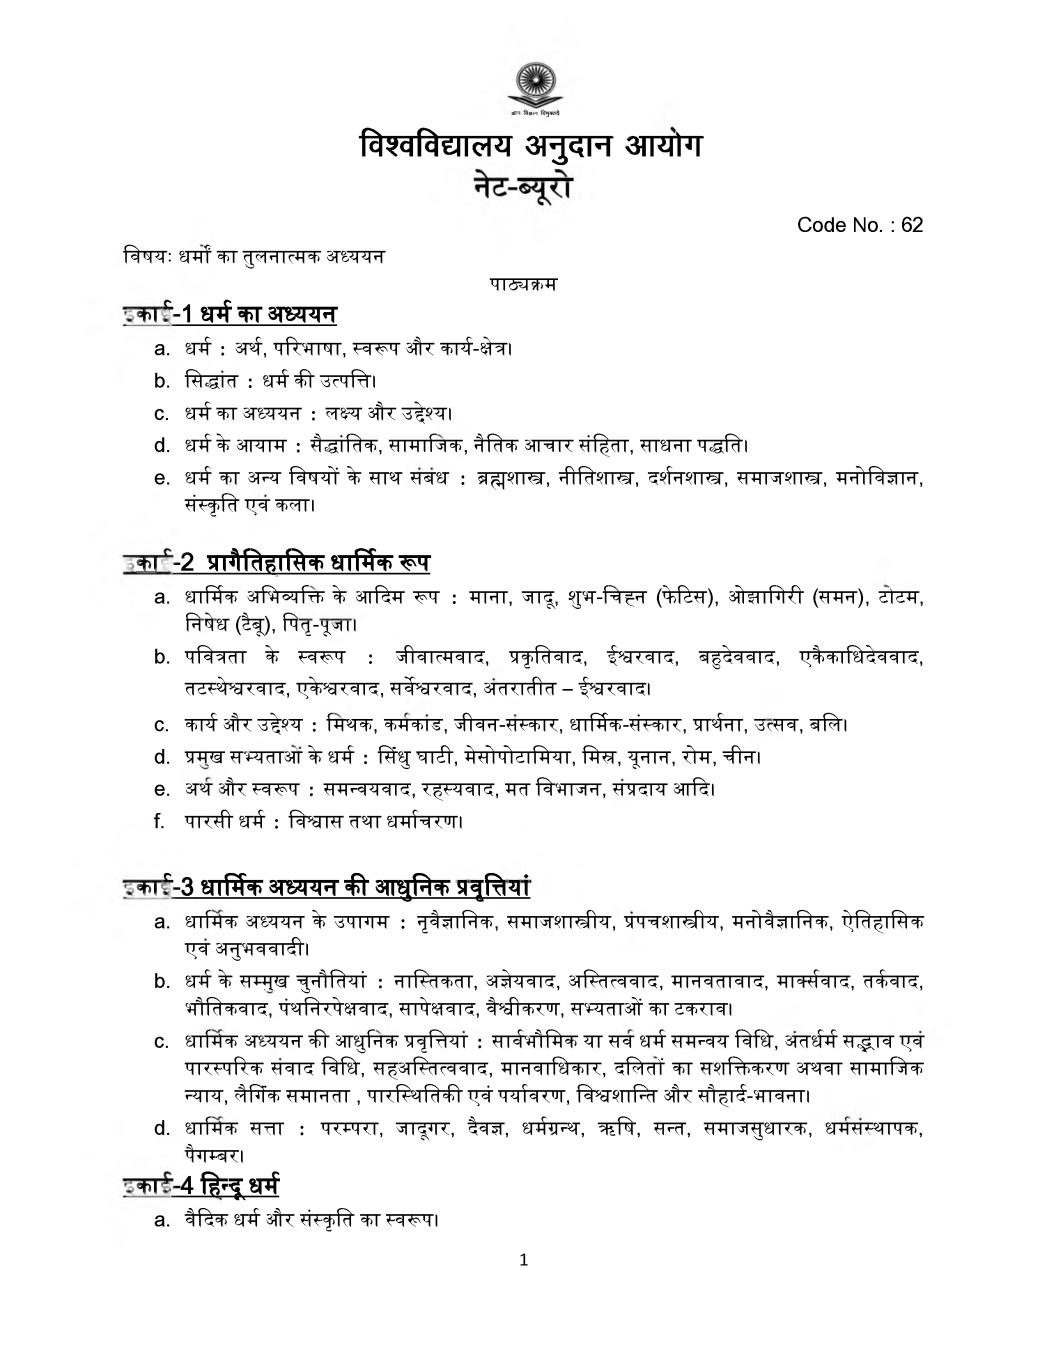 UGC NET Syllabus for	Comparative Study of Religions 2020 in Hindi - Page 1